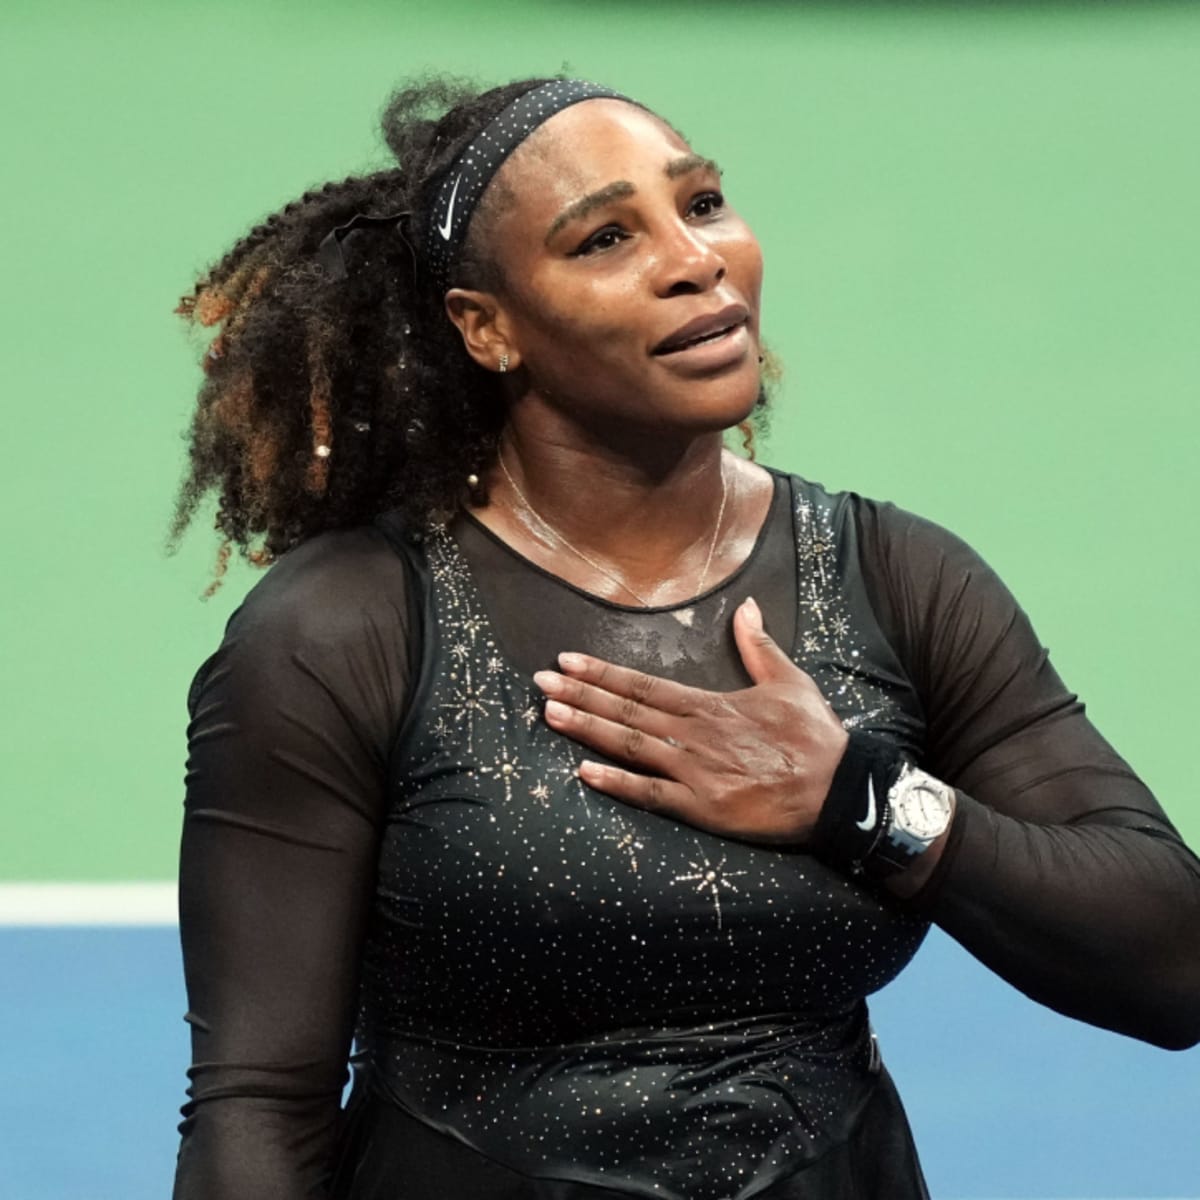 Which player did Serena Williams defeat in the final of the 2012 US Open?